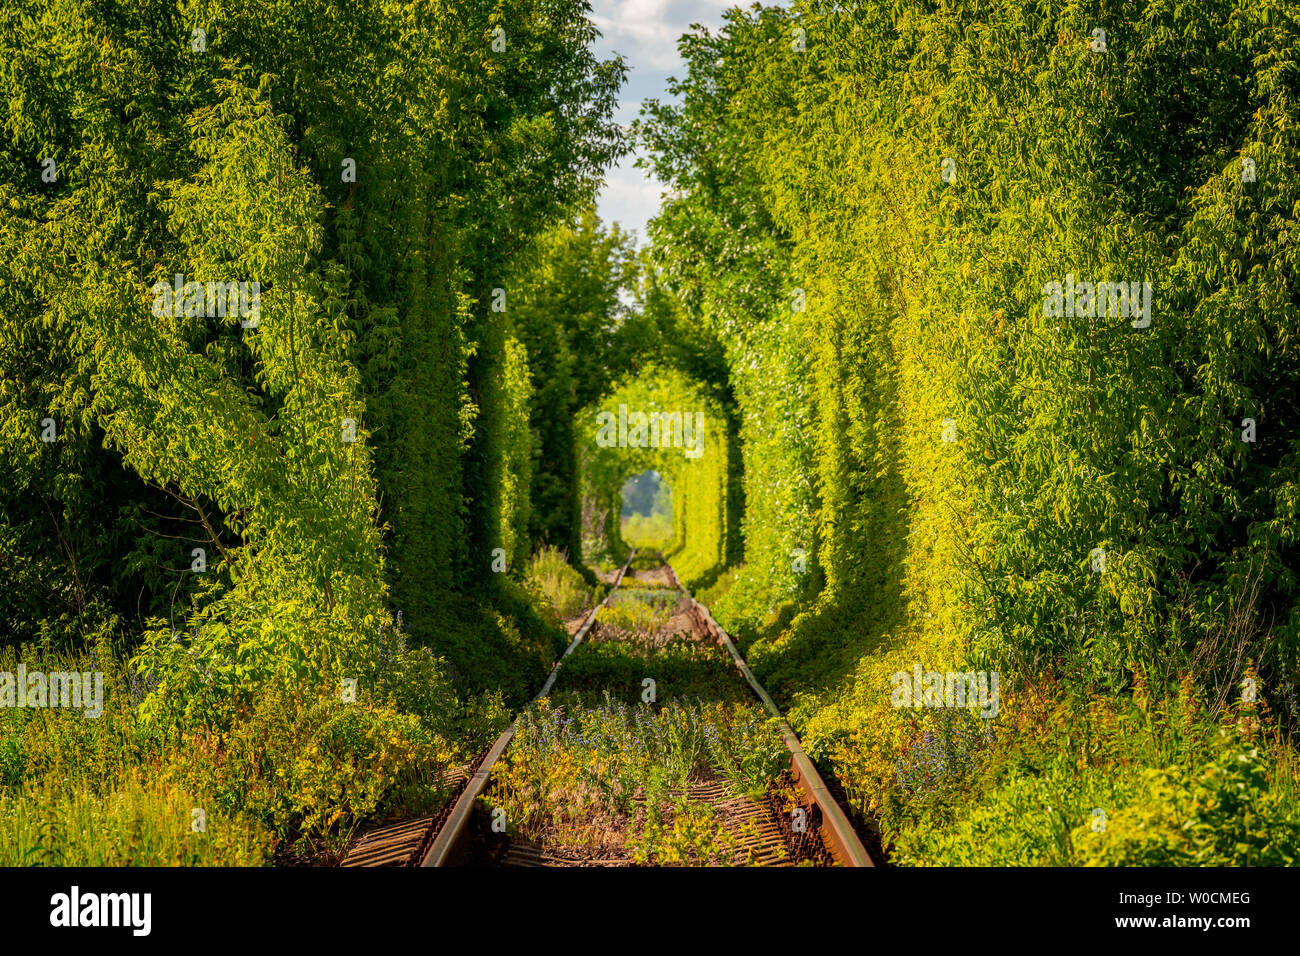 Famous Tunnel of Love in Ukraine. Railroad tunnel through the trees. Stock Photo